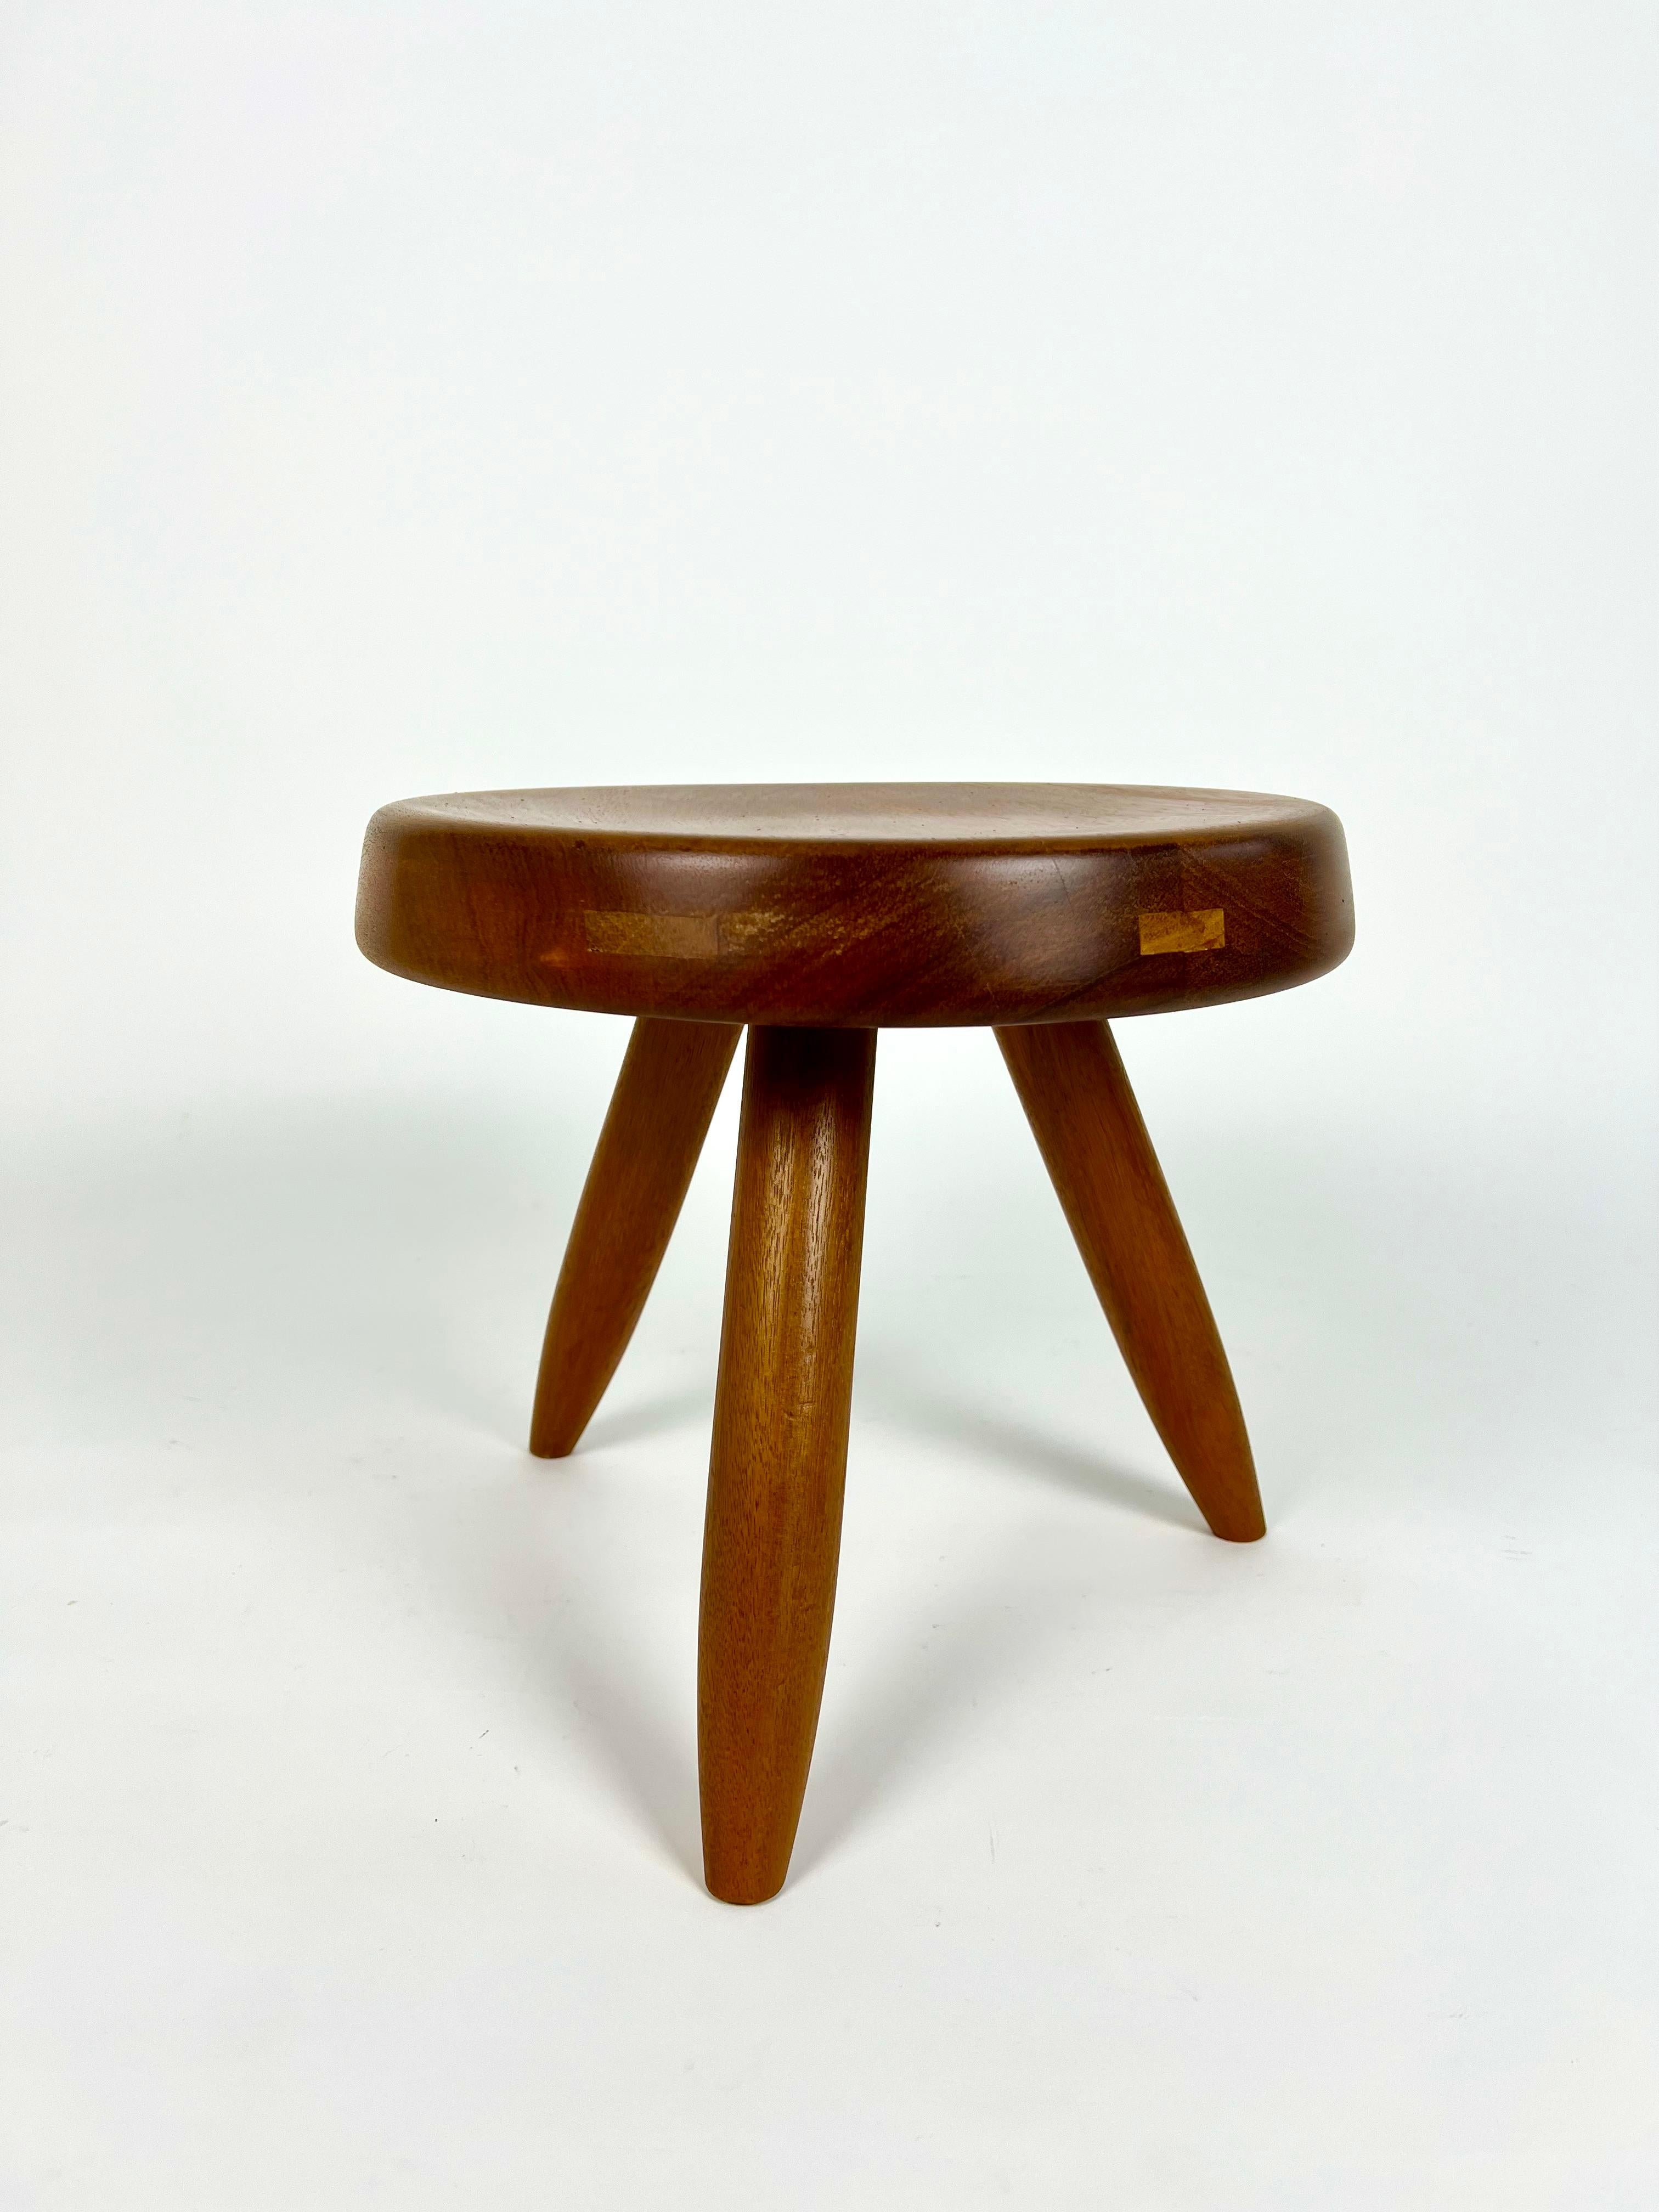 French Berger low stool in mahogany, Charlotte Perriand